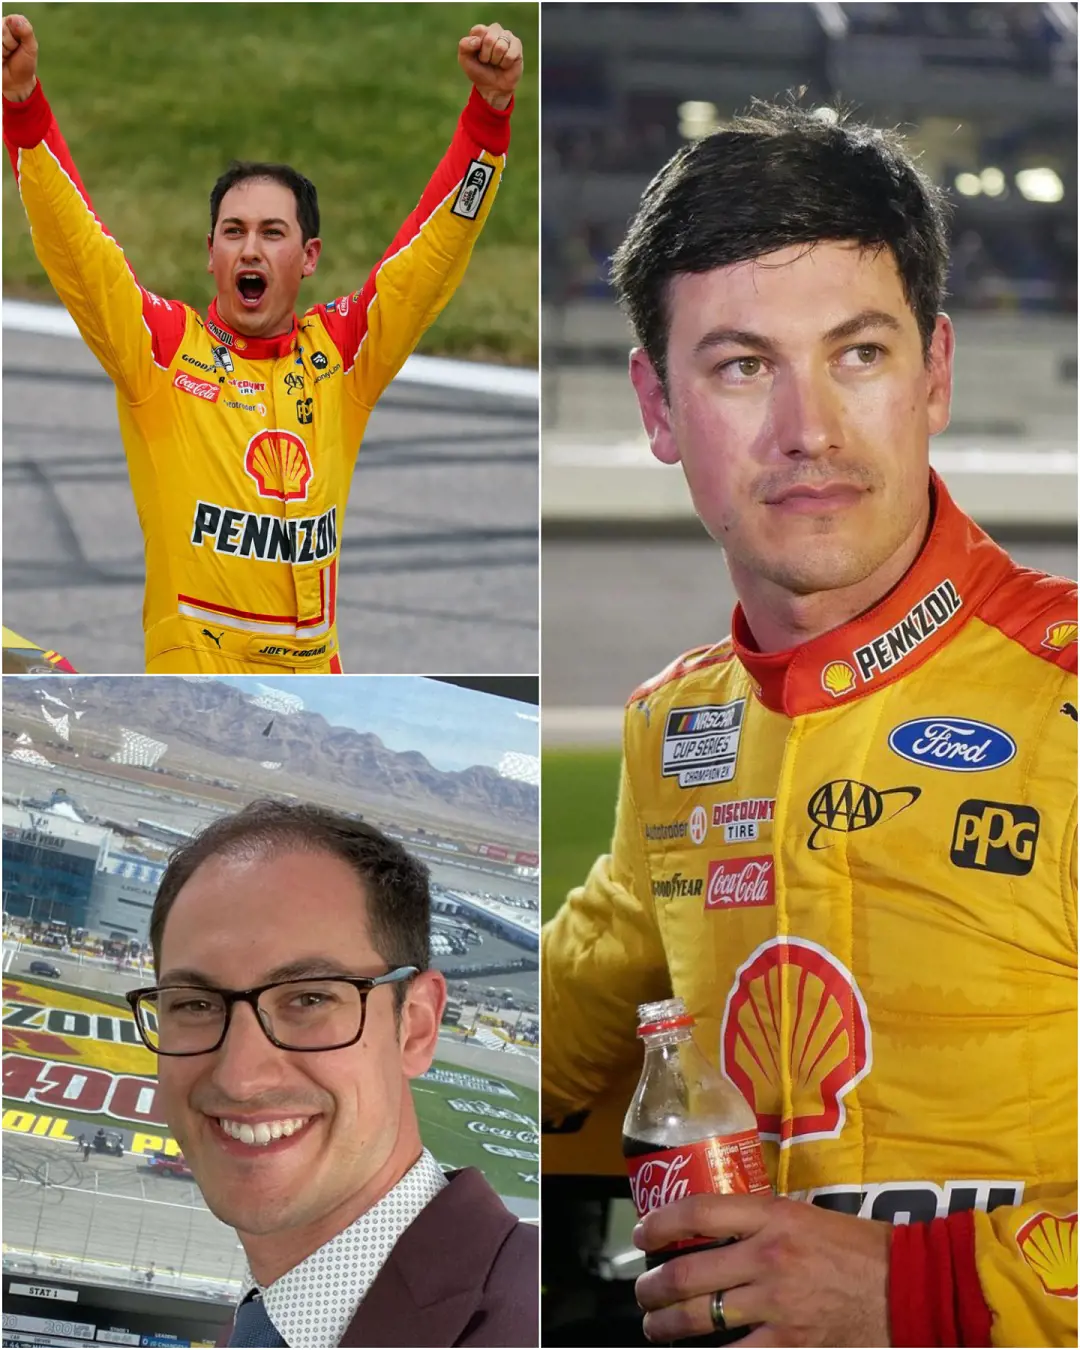 Logano looks very different now and prior to getting implantation.